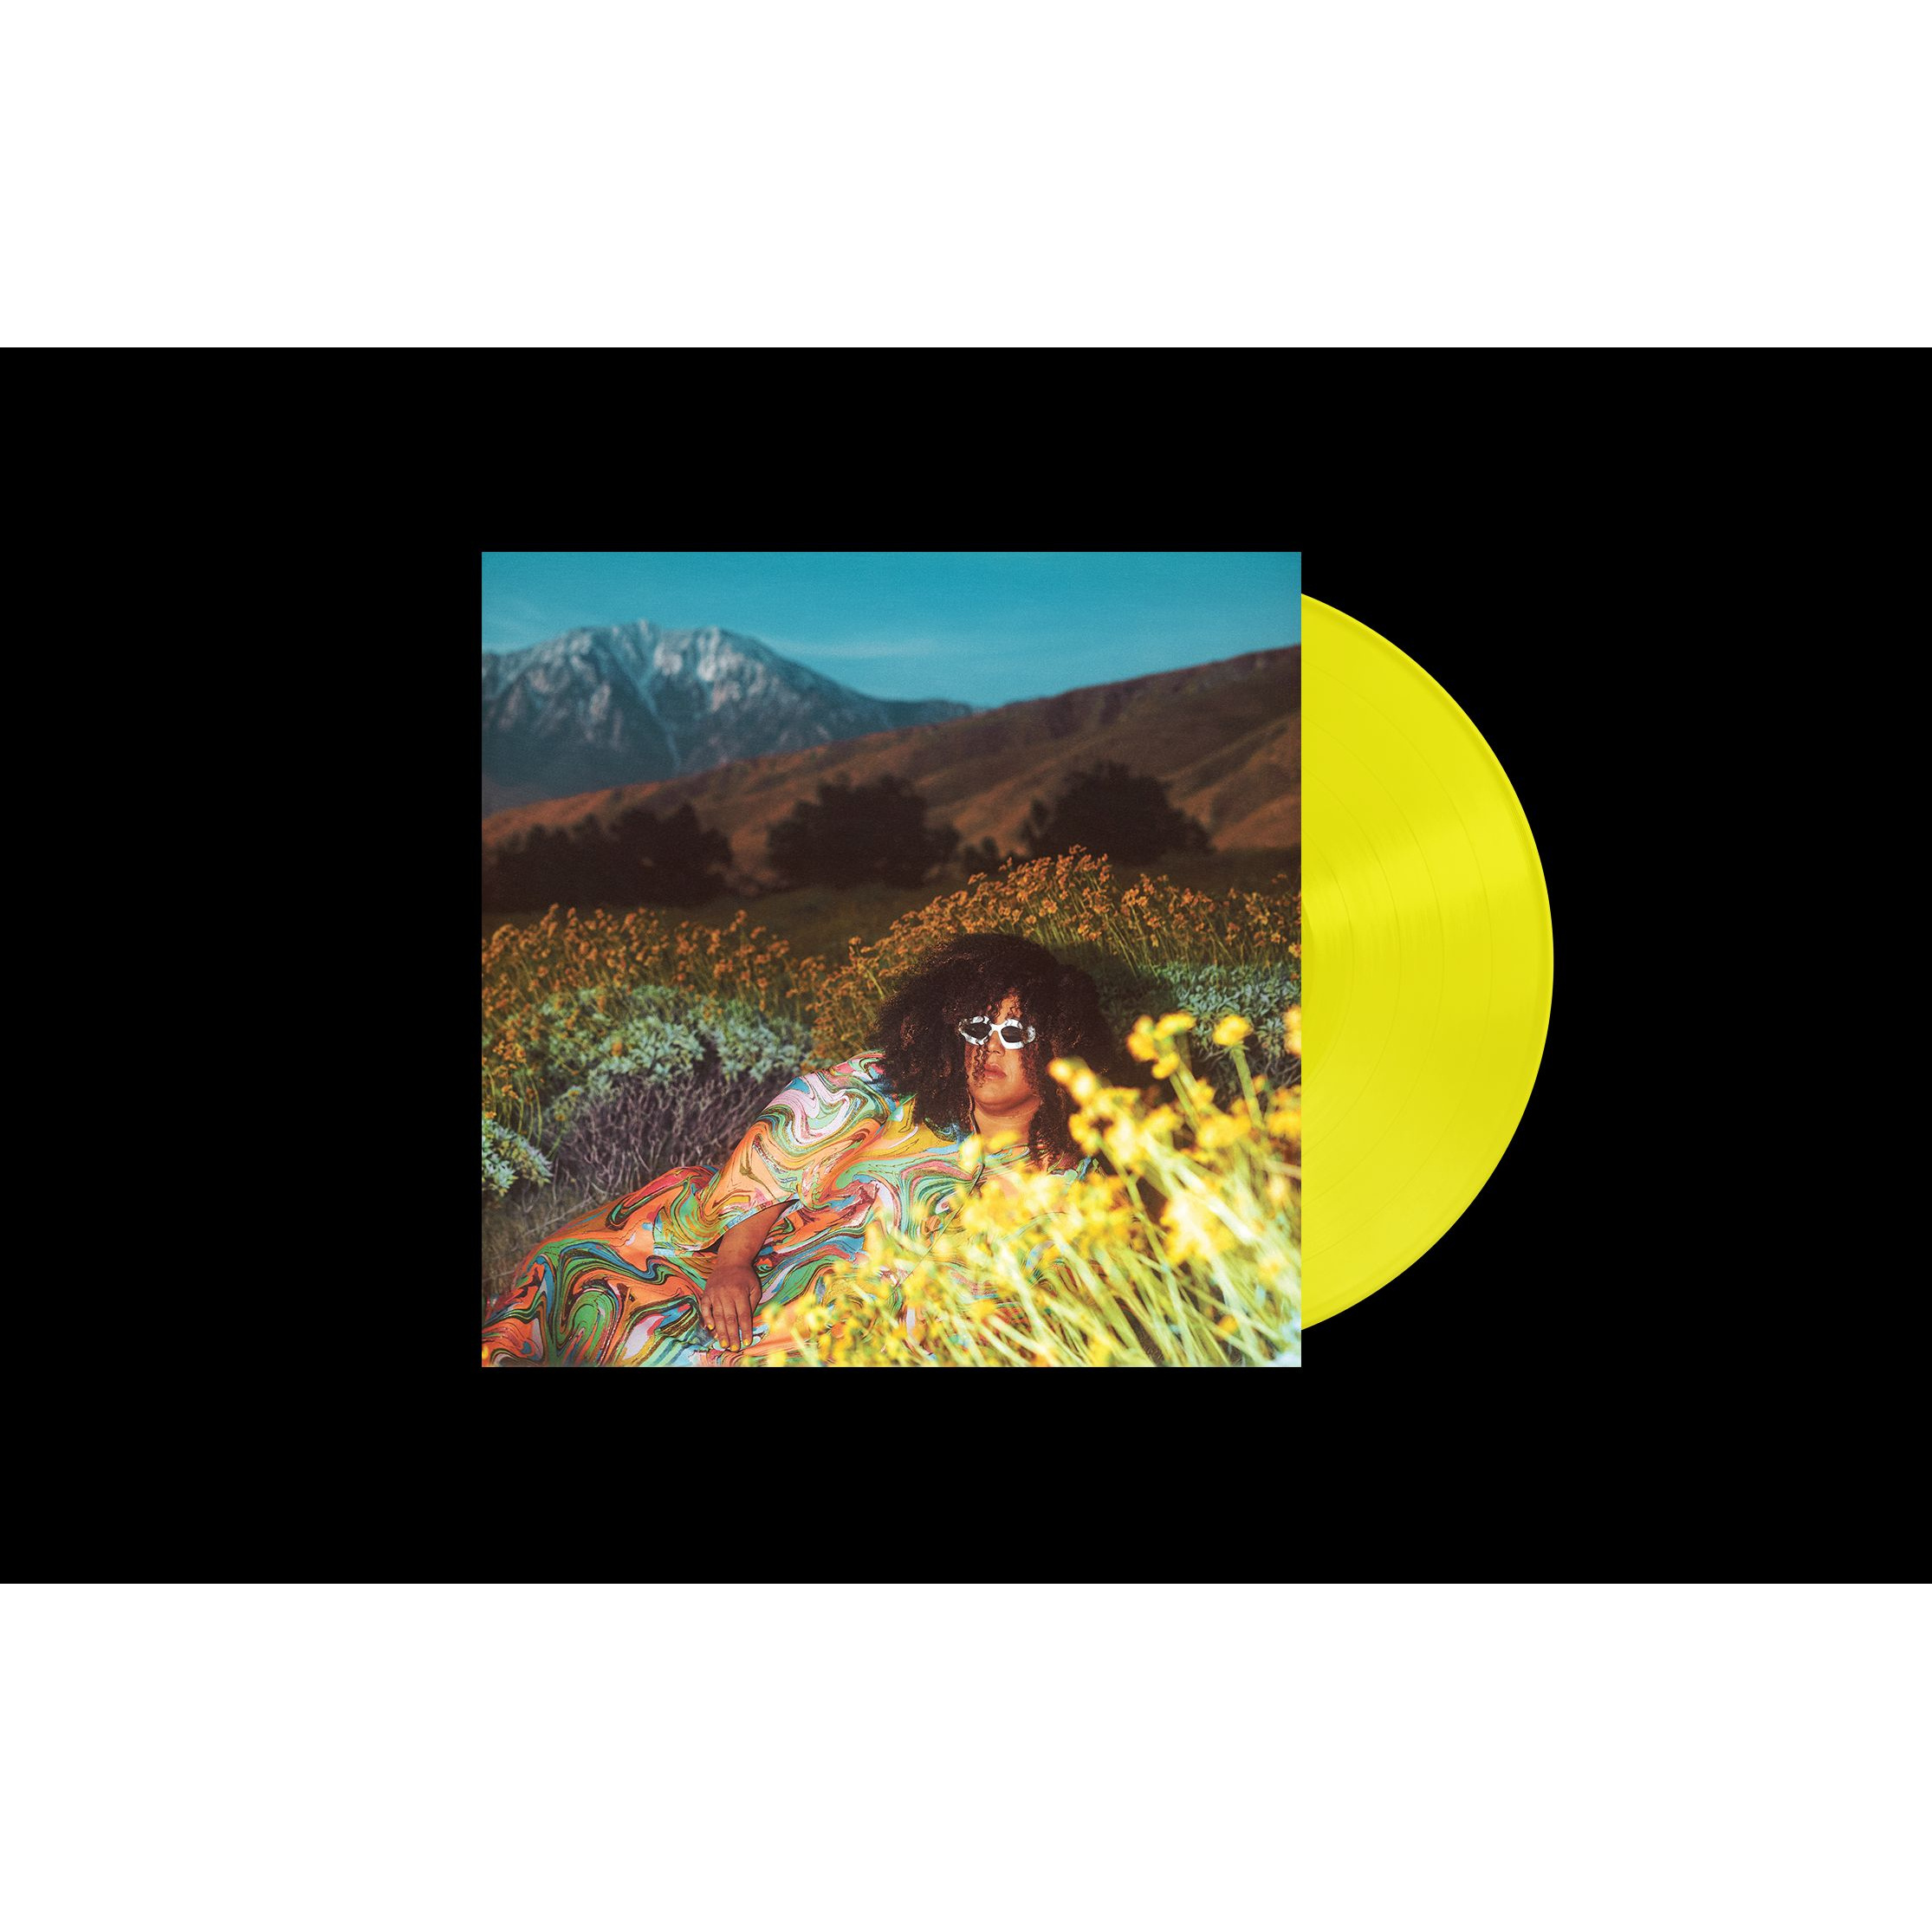 What Now Vinile Lp 180 Gr. Colorato Giallo Indie Exclusive